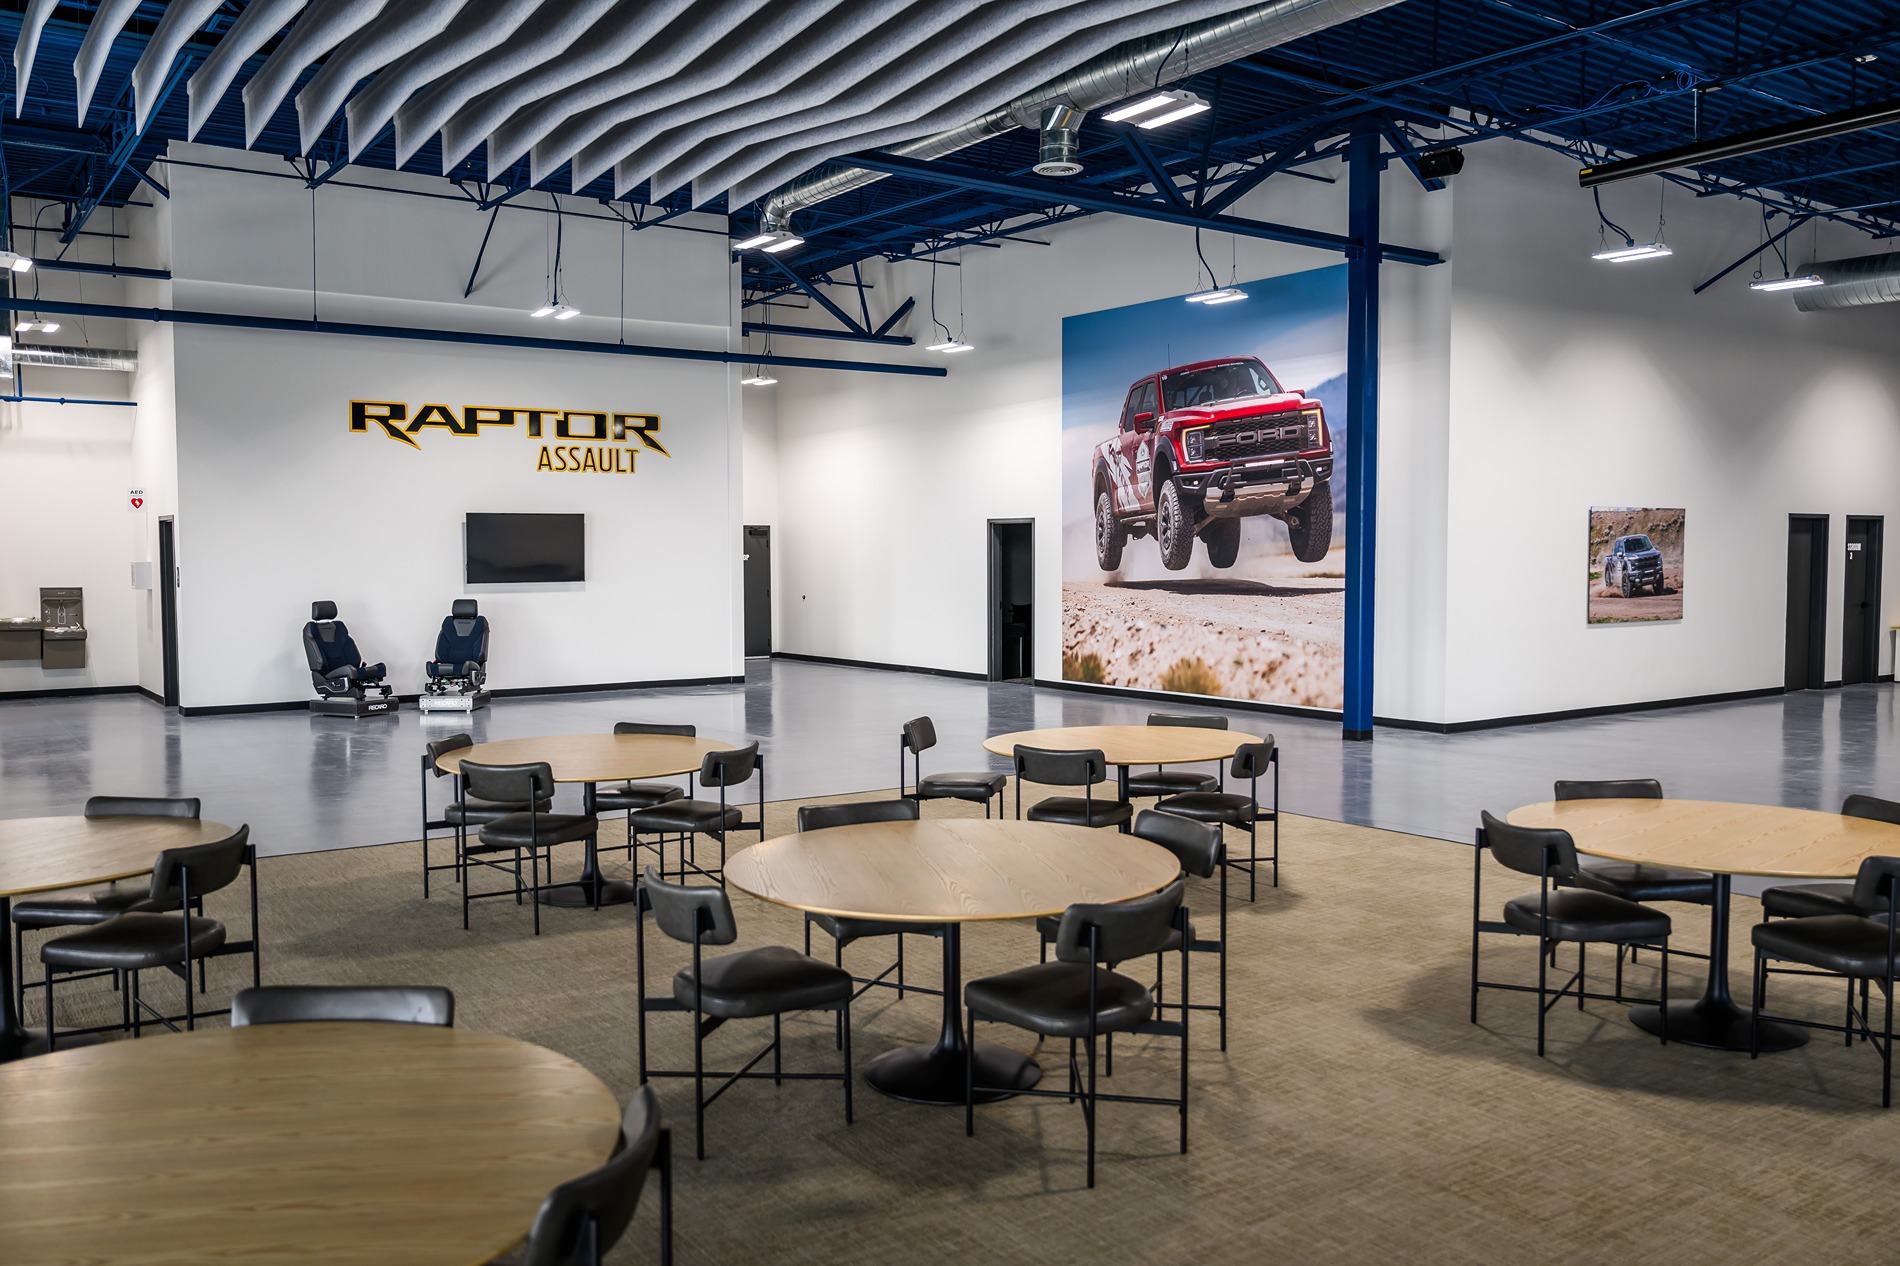 Ford Ranger Ranger Raptor Assault School Announced Exclusively (& Free) for Owners Ford Performance Racing School_Raptor Assault 8